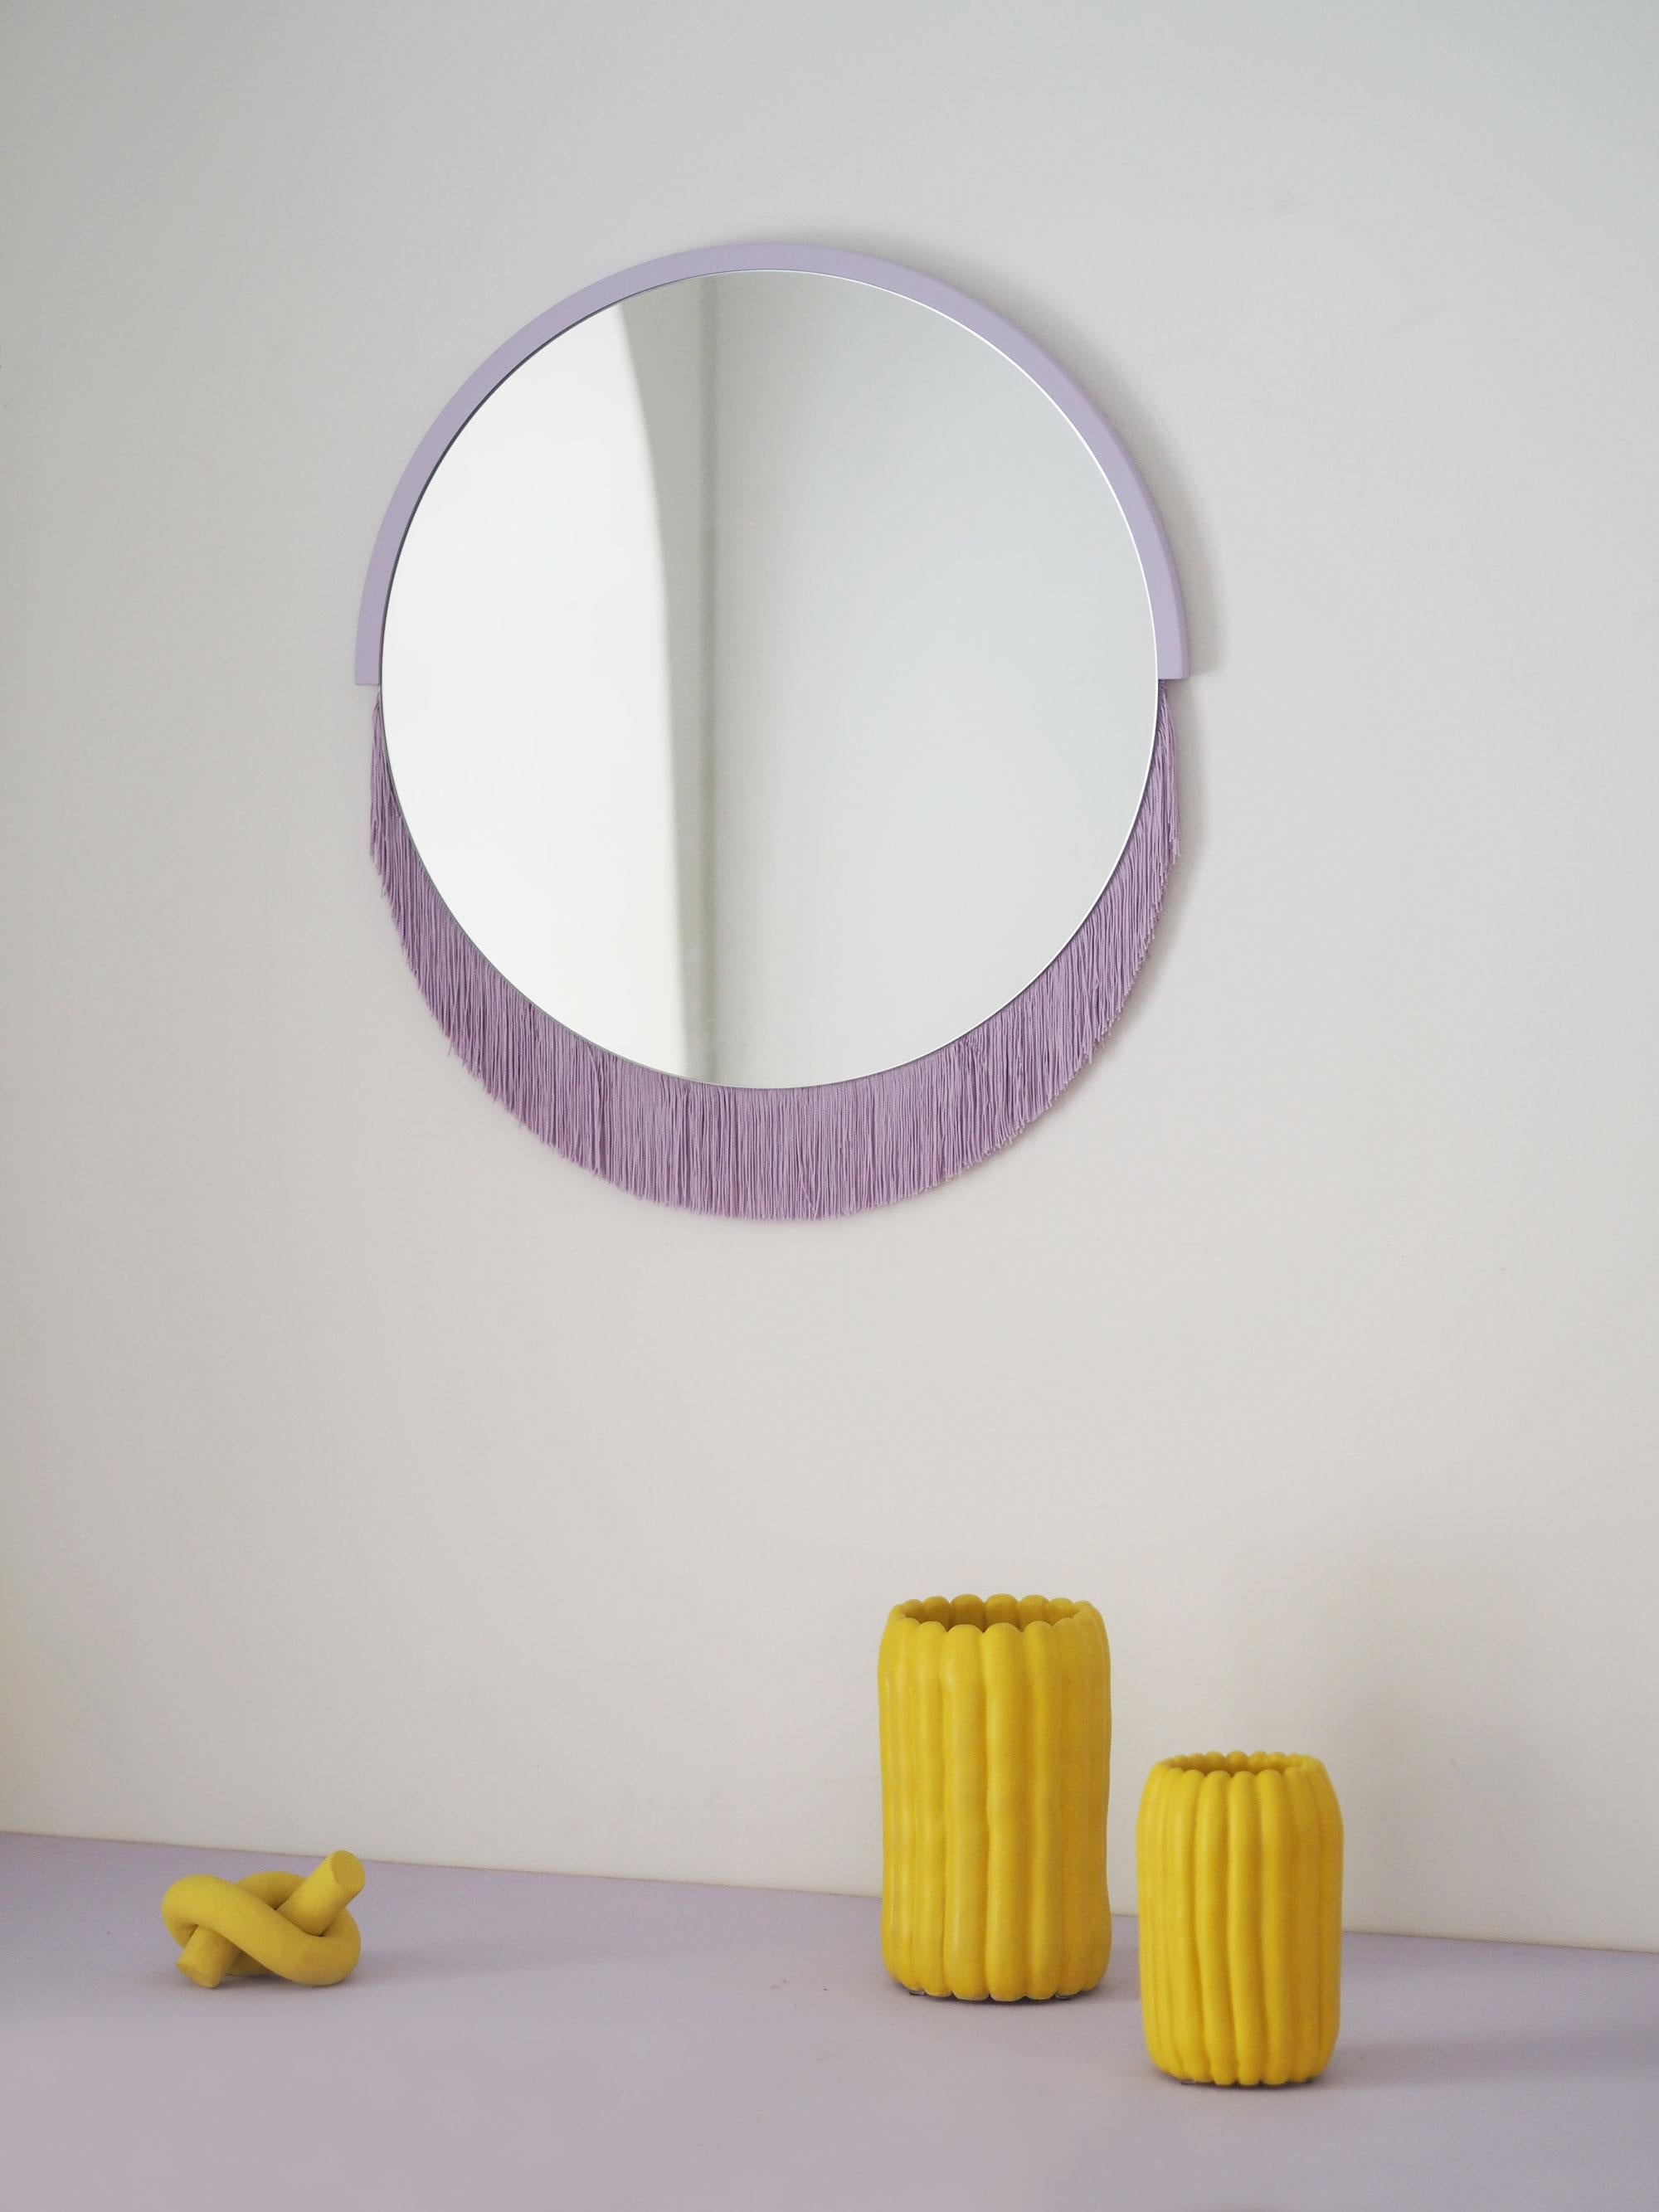 Set of 4 Boudoir Wall Mirrors by Tero Kuitunen For Sale 10